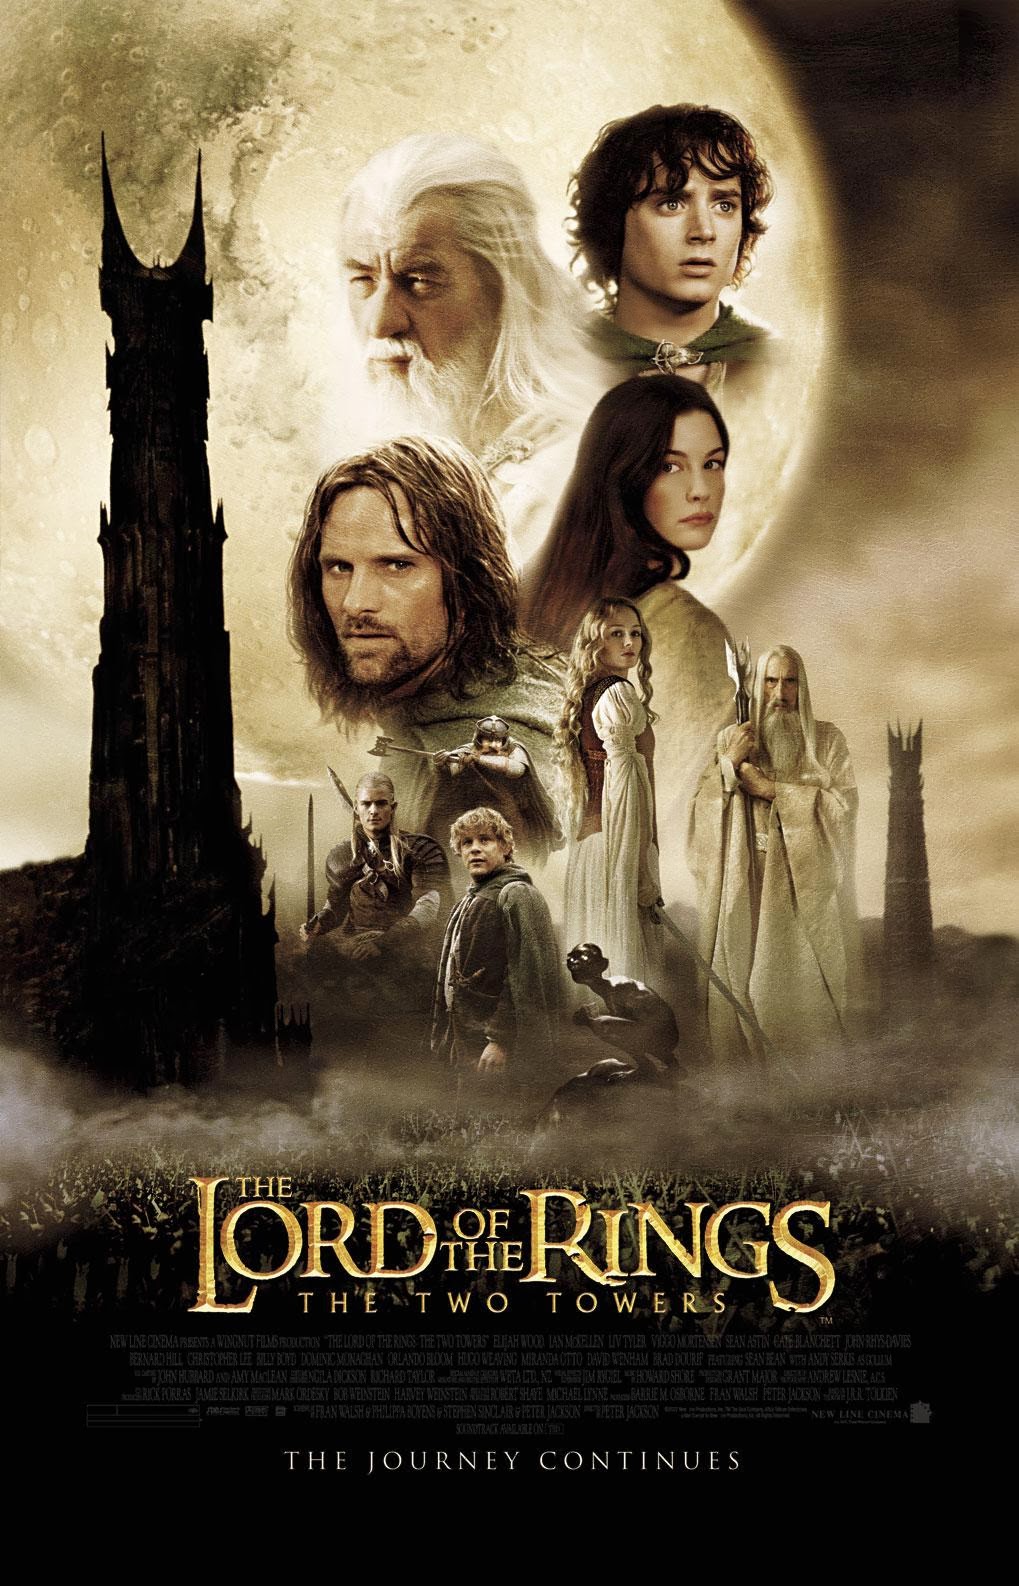 Download Film The Lord of the Rings: The Two Towers (2002) BluRay 720p